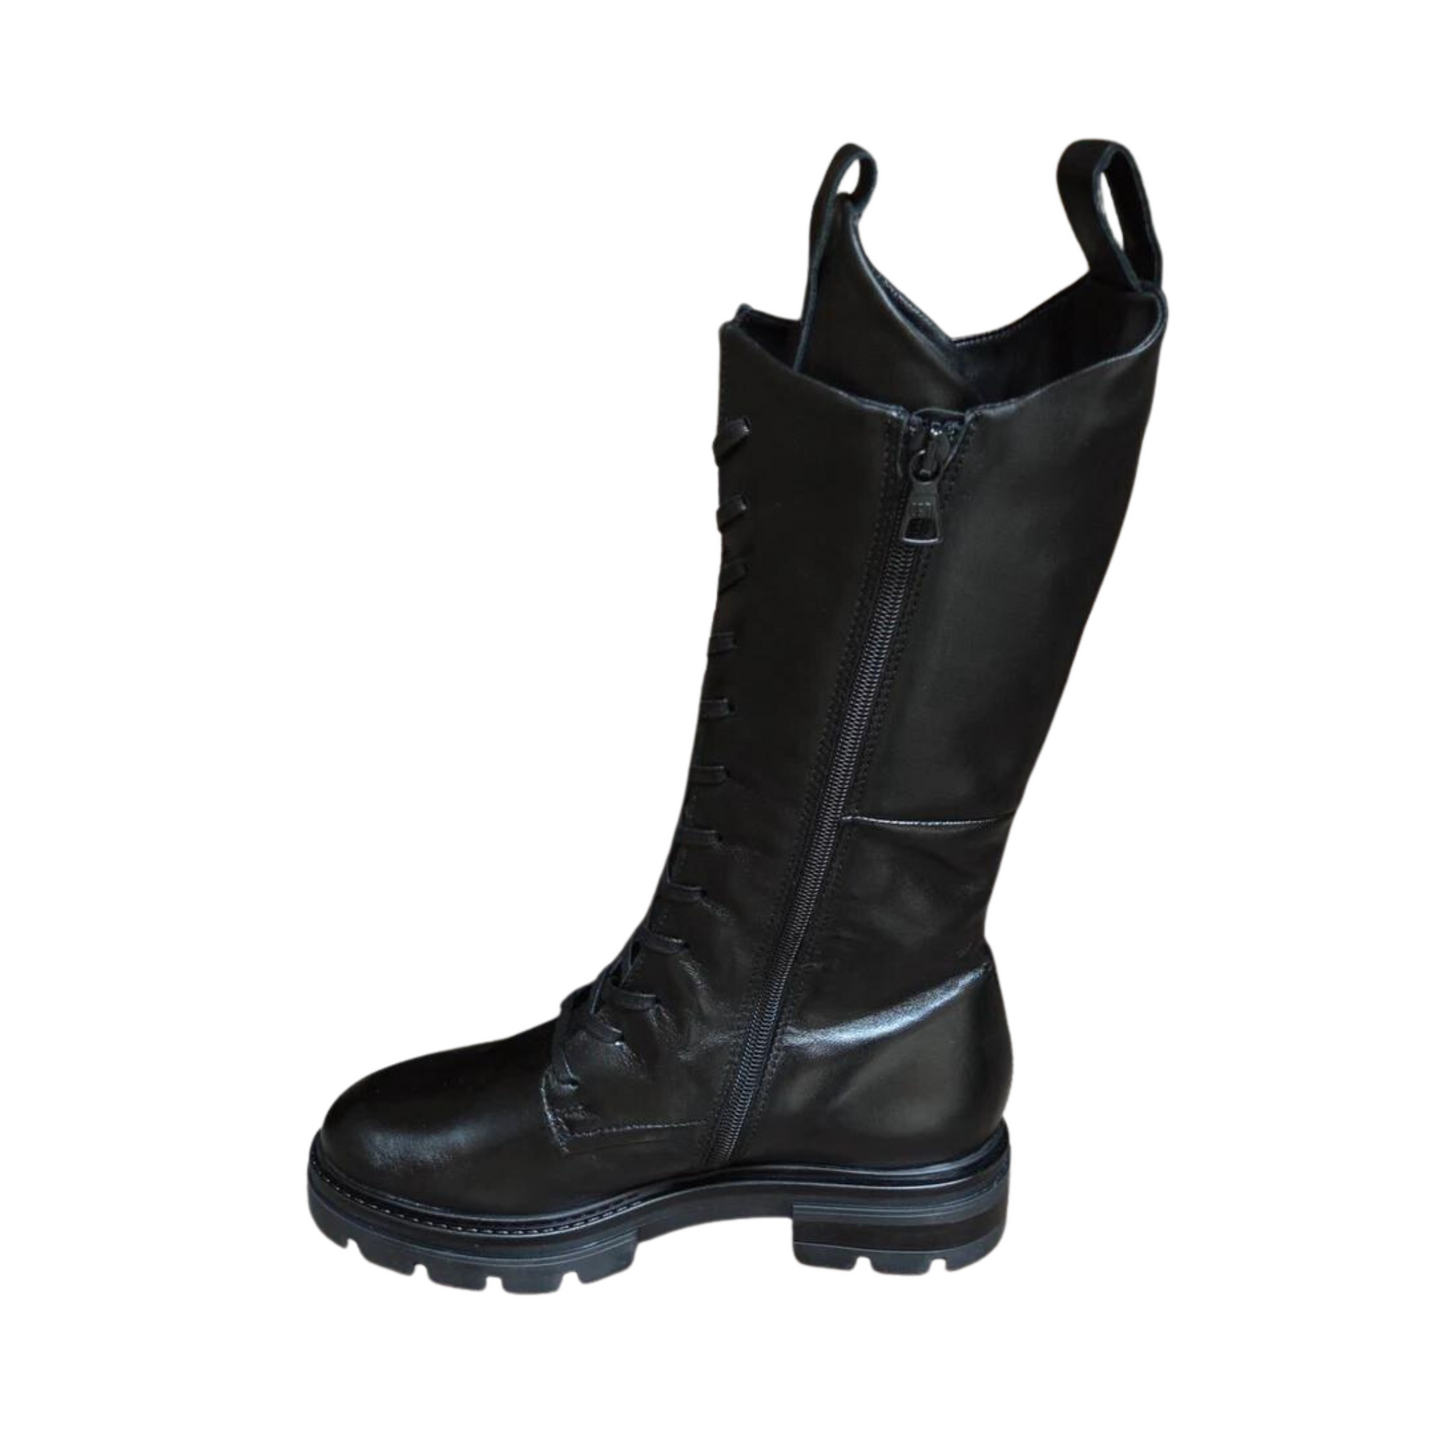 Left side profile of the Mjus Bologna Boot in the colour Black.